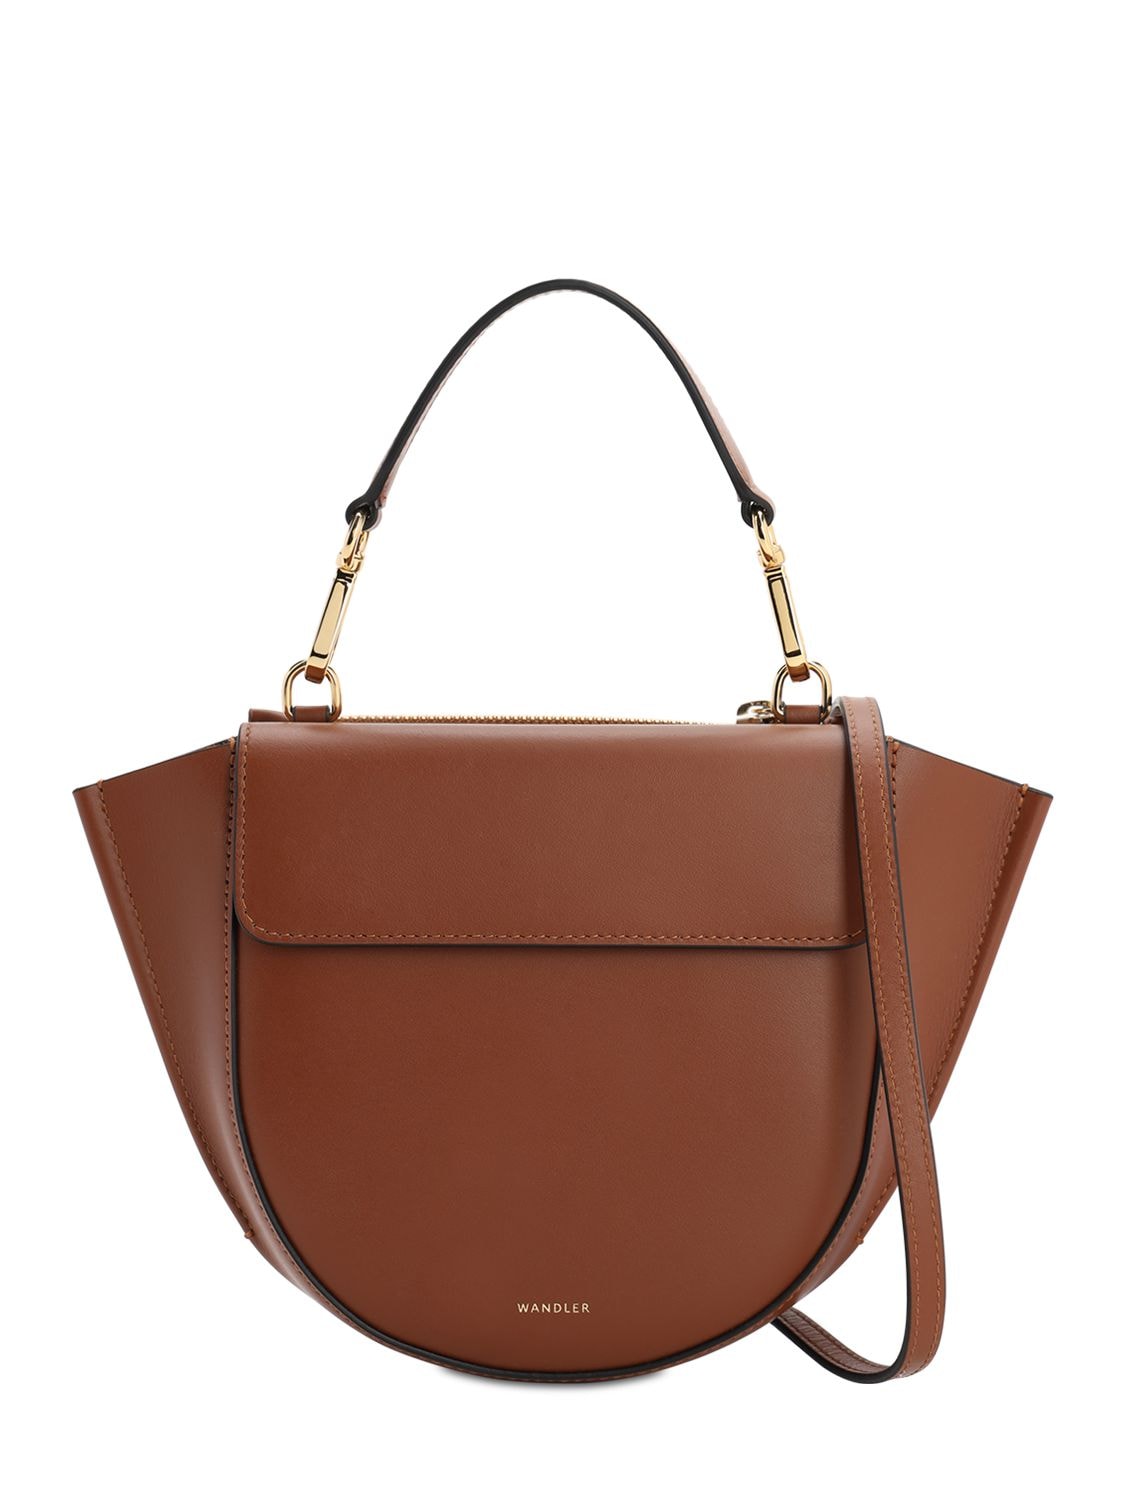 Women's WANDLER Bags On Sale, Up To 70% Off | ModeSens